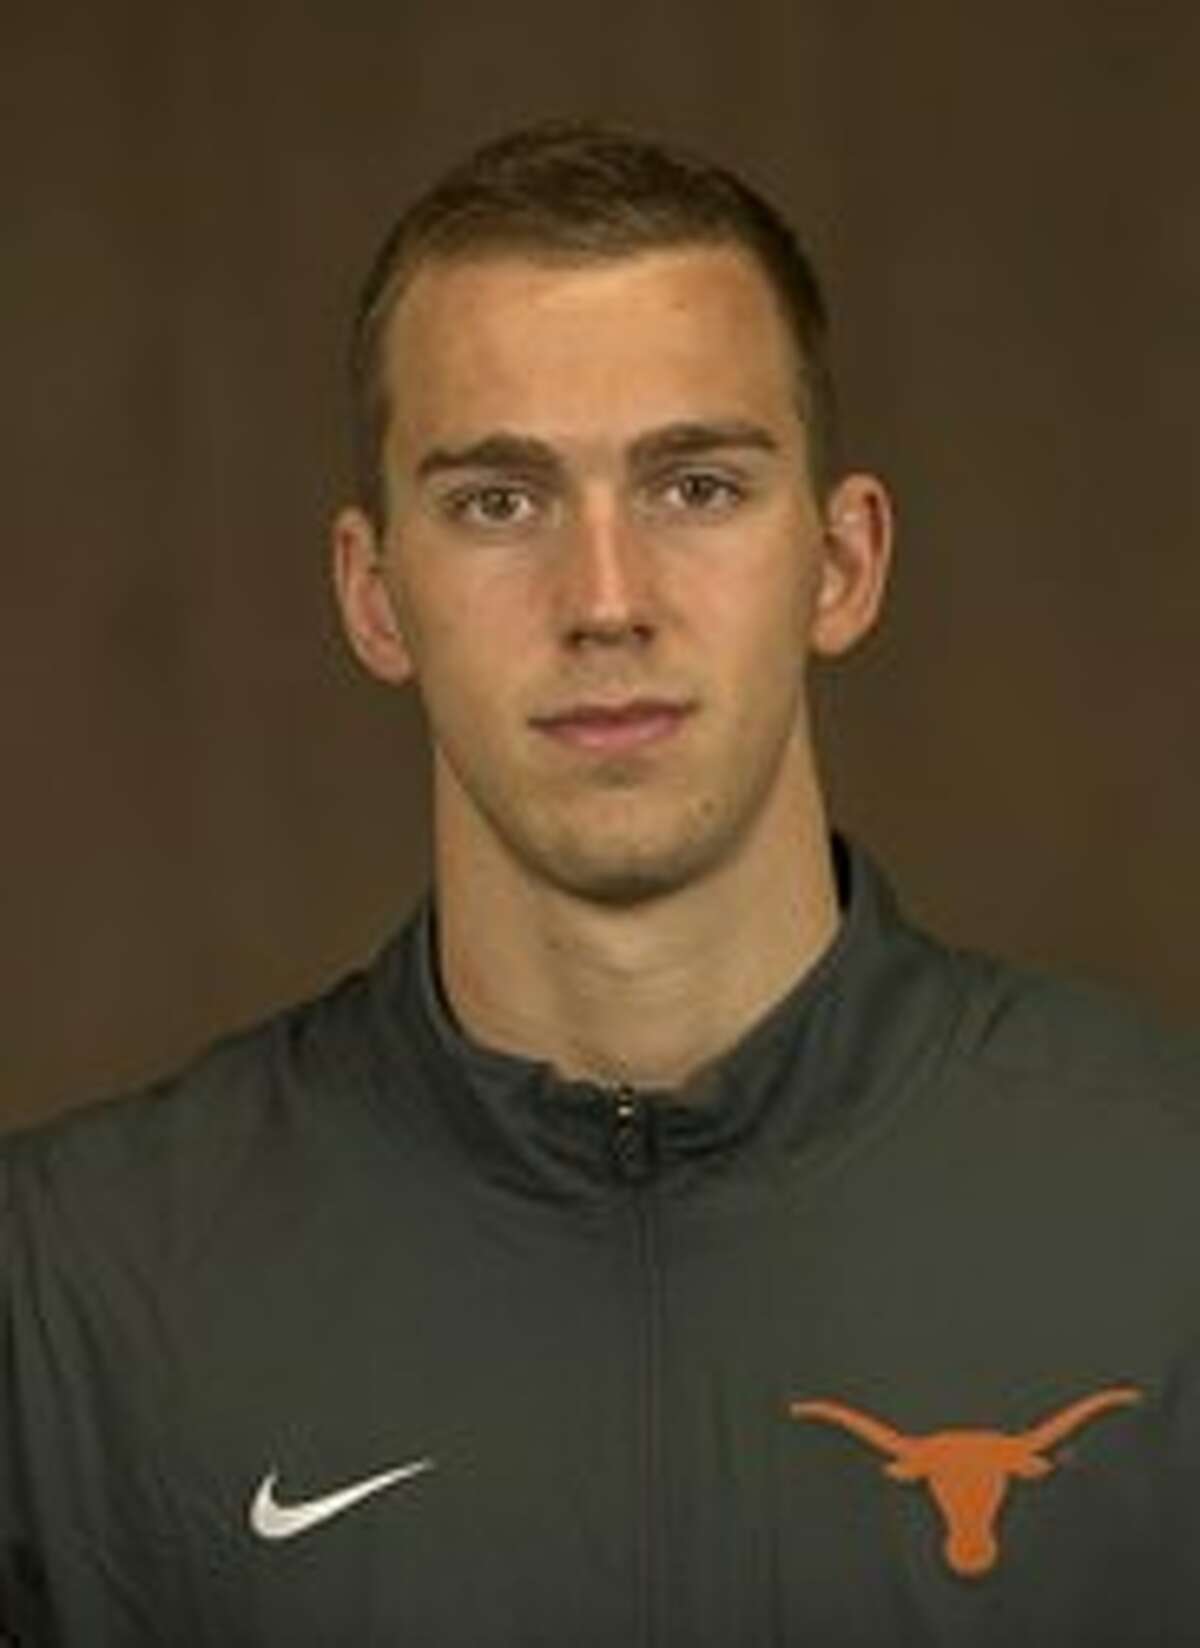 Senior Clark Smith, a 6-foot-9 senior from Denver, raced to a victory in Saturday's 1,650 freestyle final at the NCAA Men's Swimming and Diving Championships in Indianapolis. Smith, the son of former Texas NCAA championship swimmers John and Tori Smith, now holds American records in the 500, 1,000 and 1,650 freestyle events. He finishes his UT career with two additional NCAA titles in the 500 freestyle and a national championship in the 800 freestyle relay a year ago. 